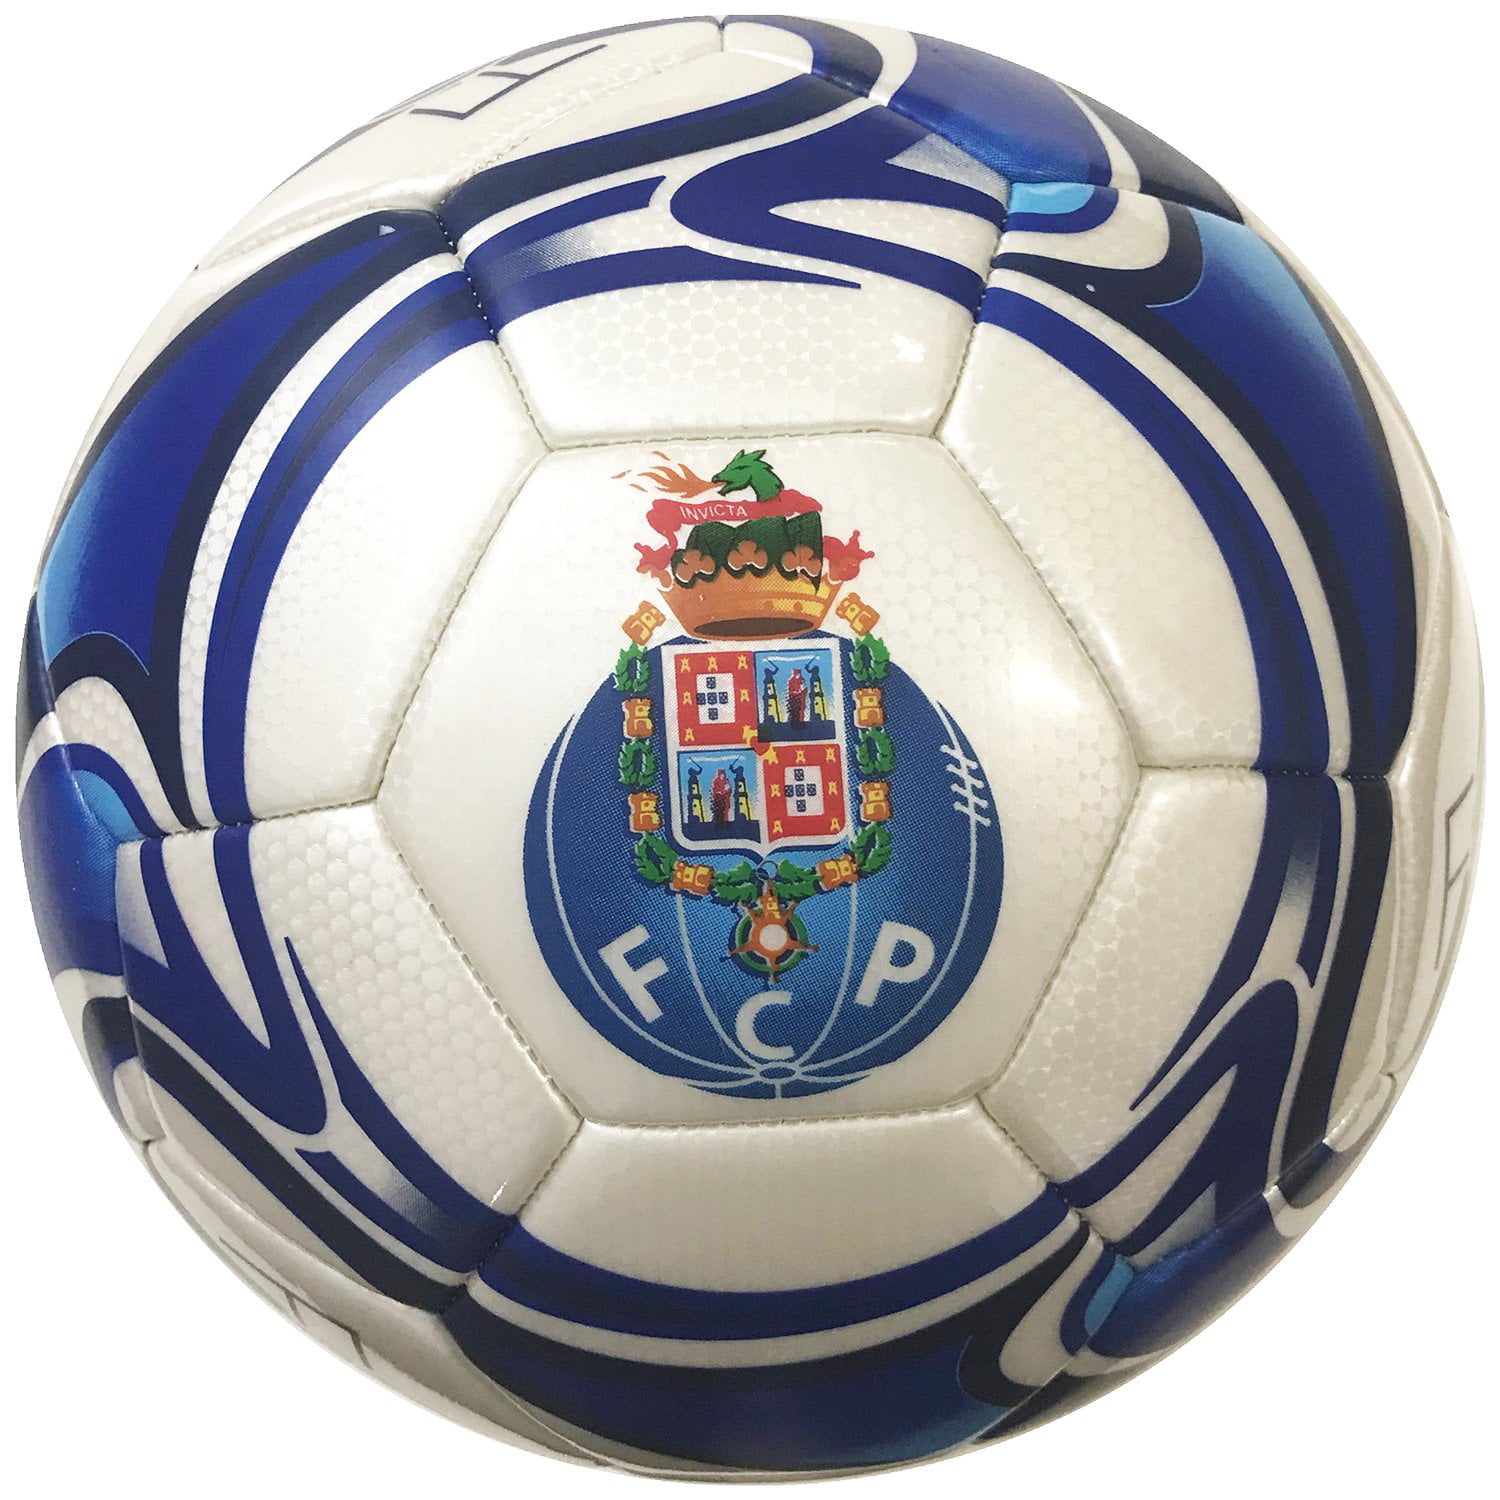 FC Porto Authentic Official Licensed Soccer Ball Size 5 